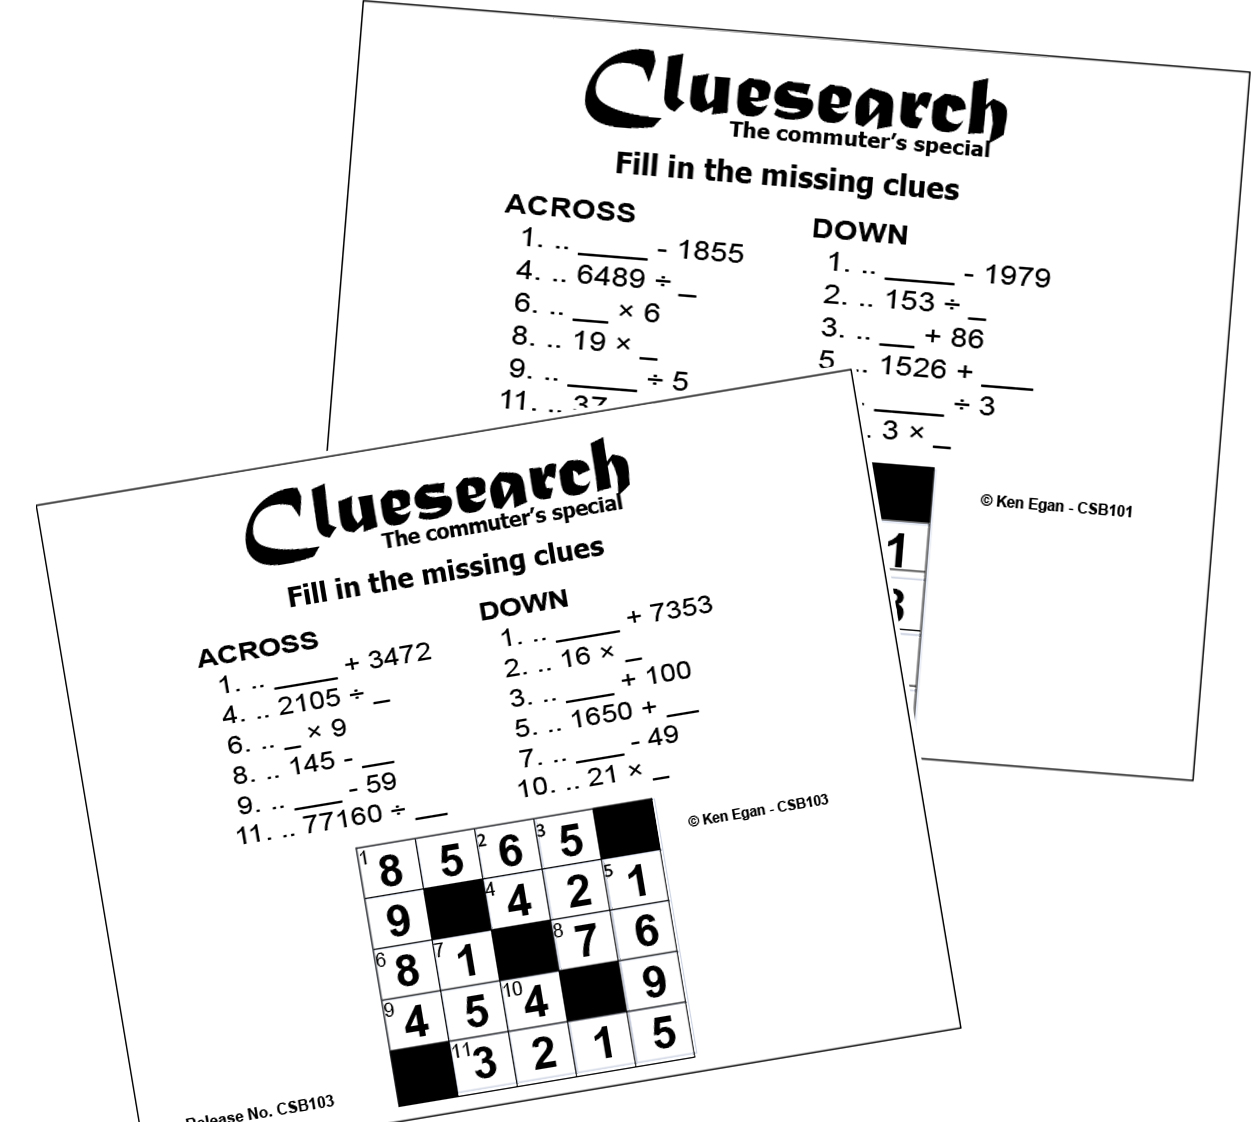 Thumbnail for 20 CLUESEARCH PUZZLE BOOKLET 02